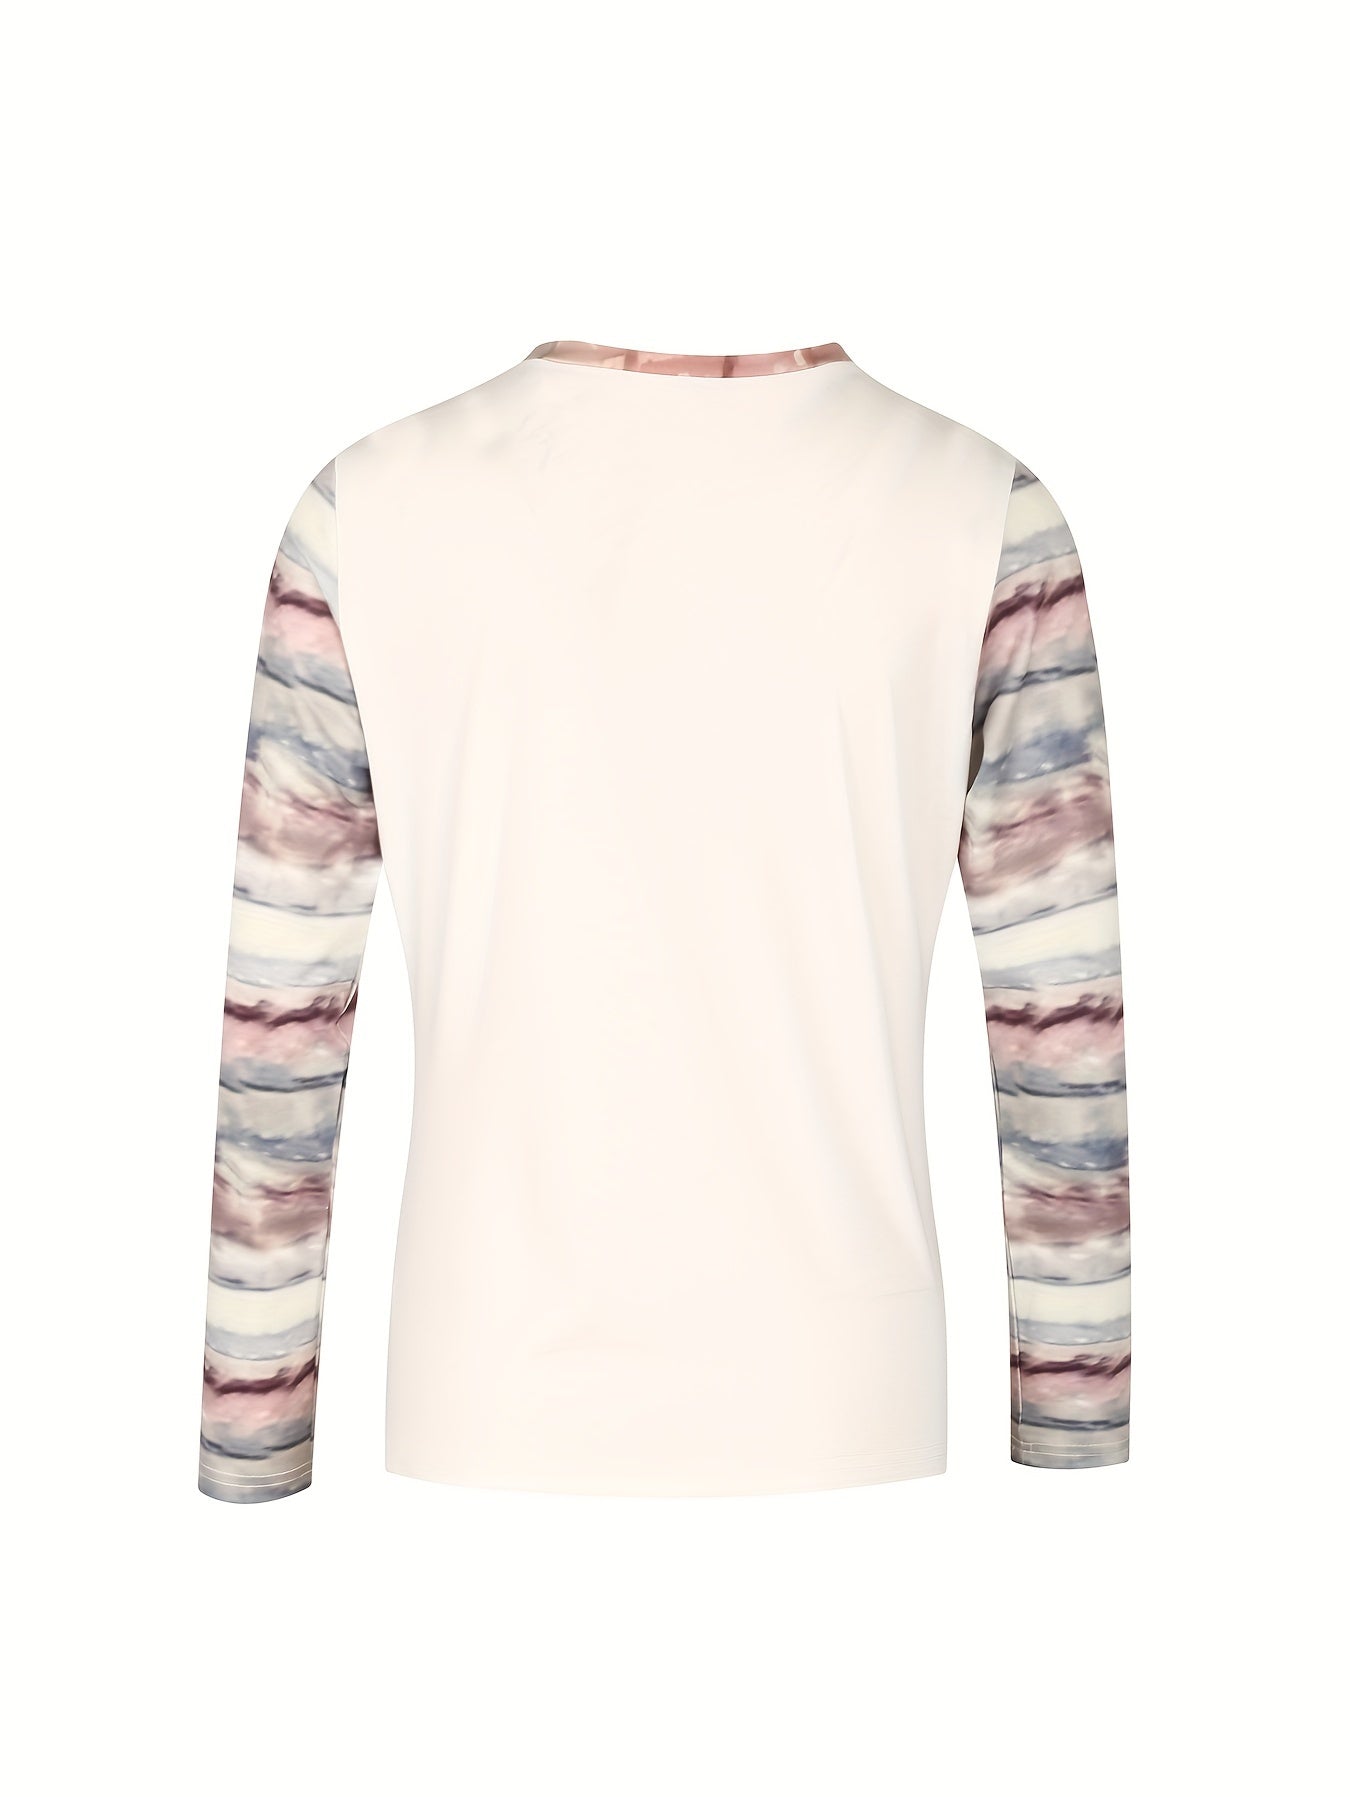 Cat Print Crew Neck T-shirt, Causal Long Sleeve Top For Spring & Fall, Women's Clothing